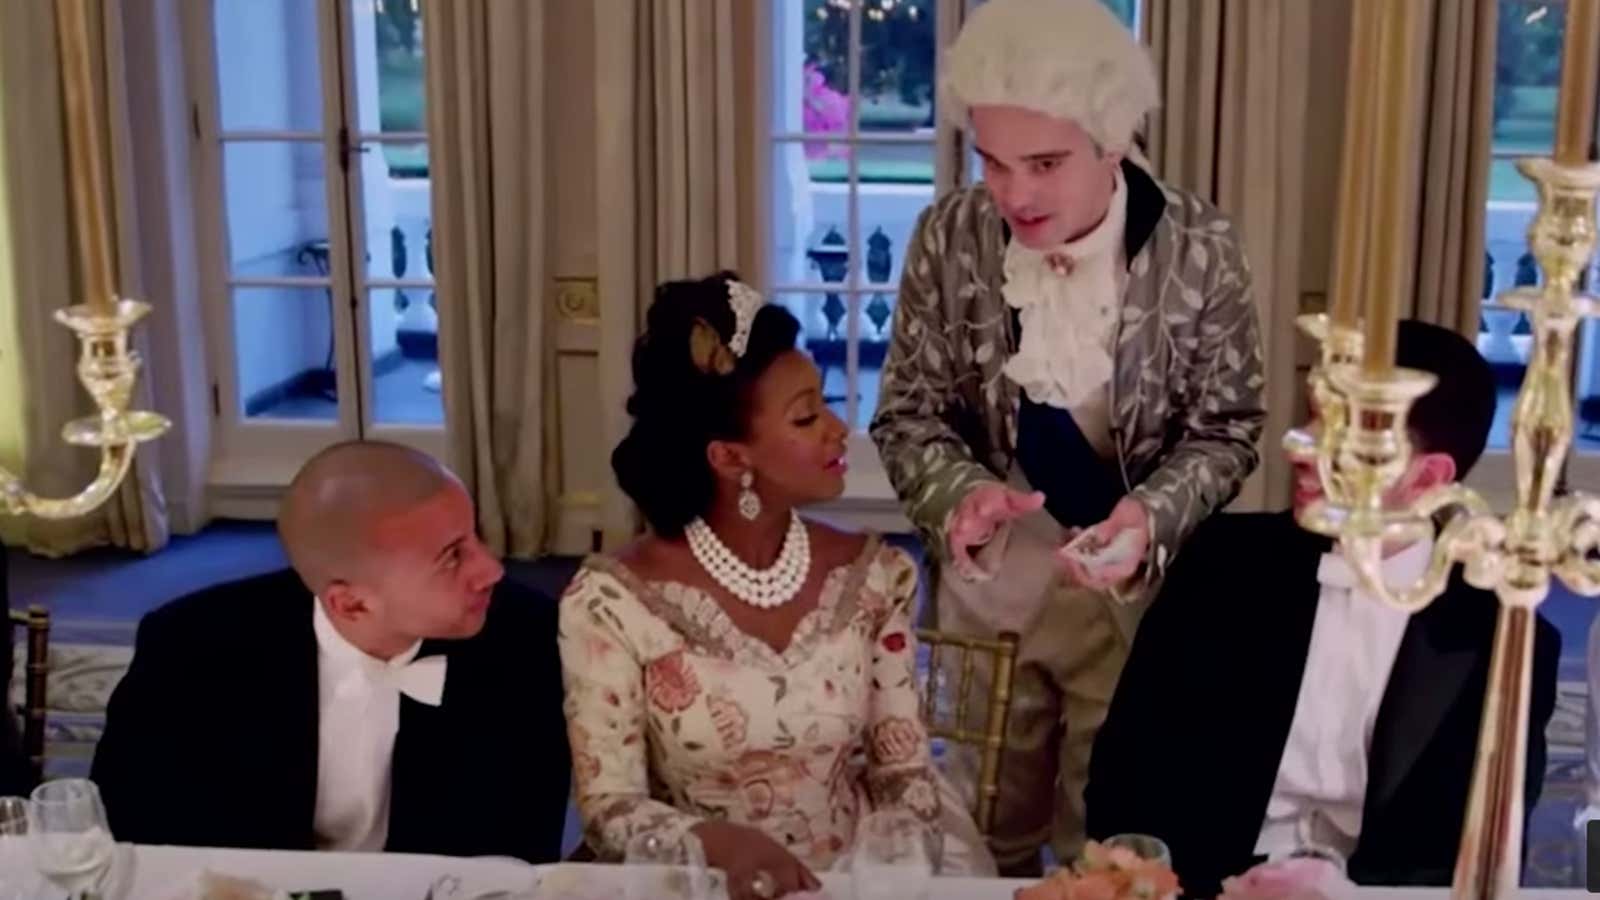 A Marie Antoinette-themed party in London by the children of a Nigerian oil magnate featured in the documentary.